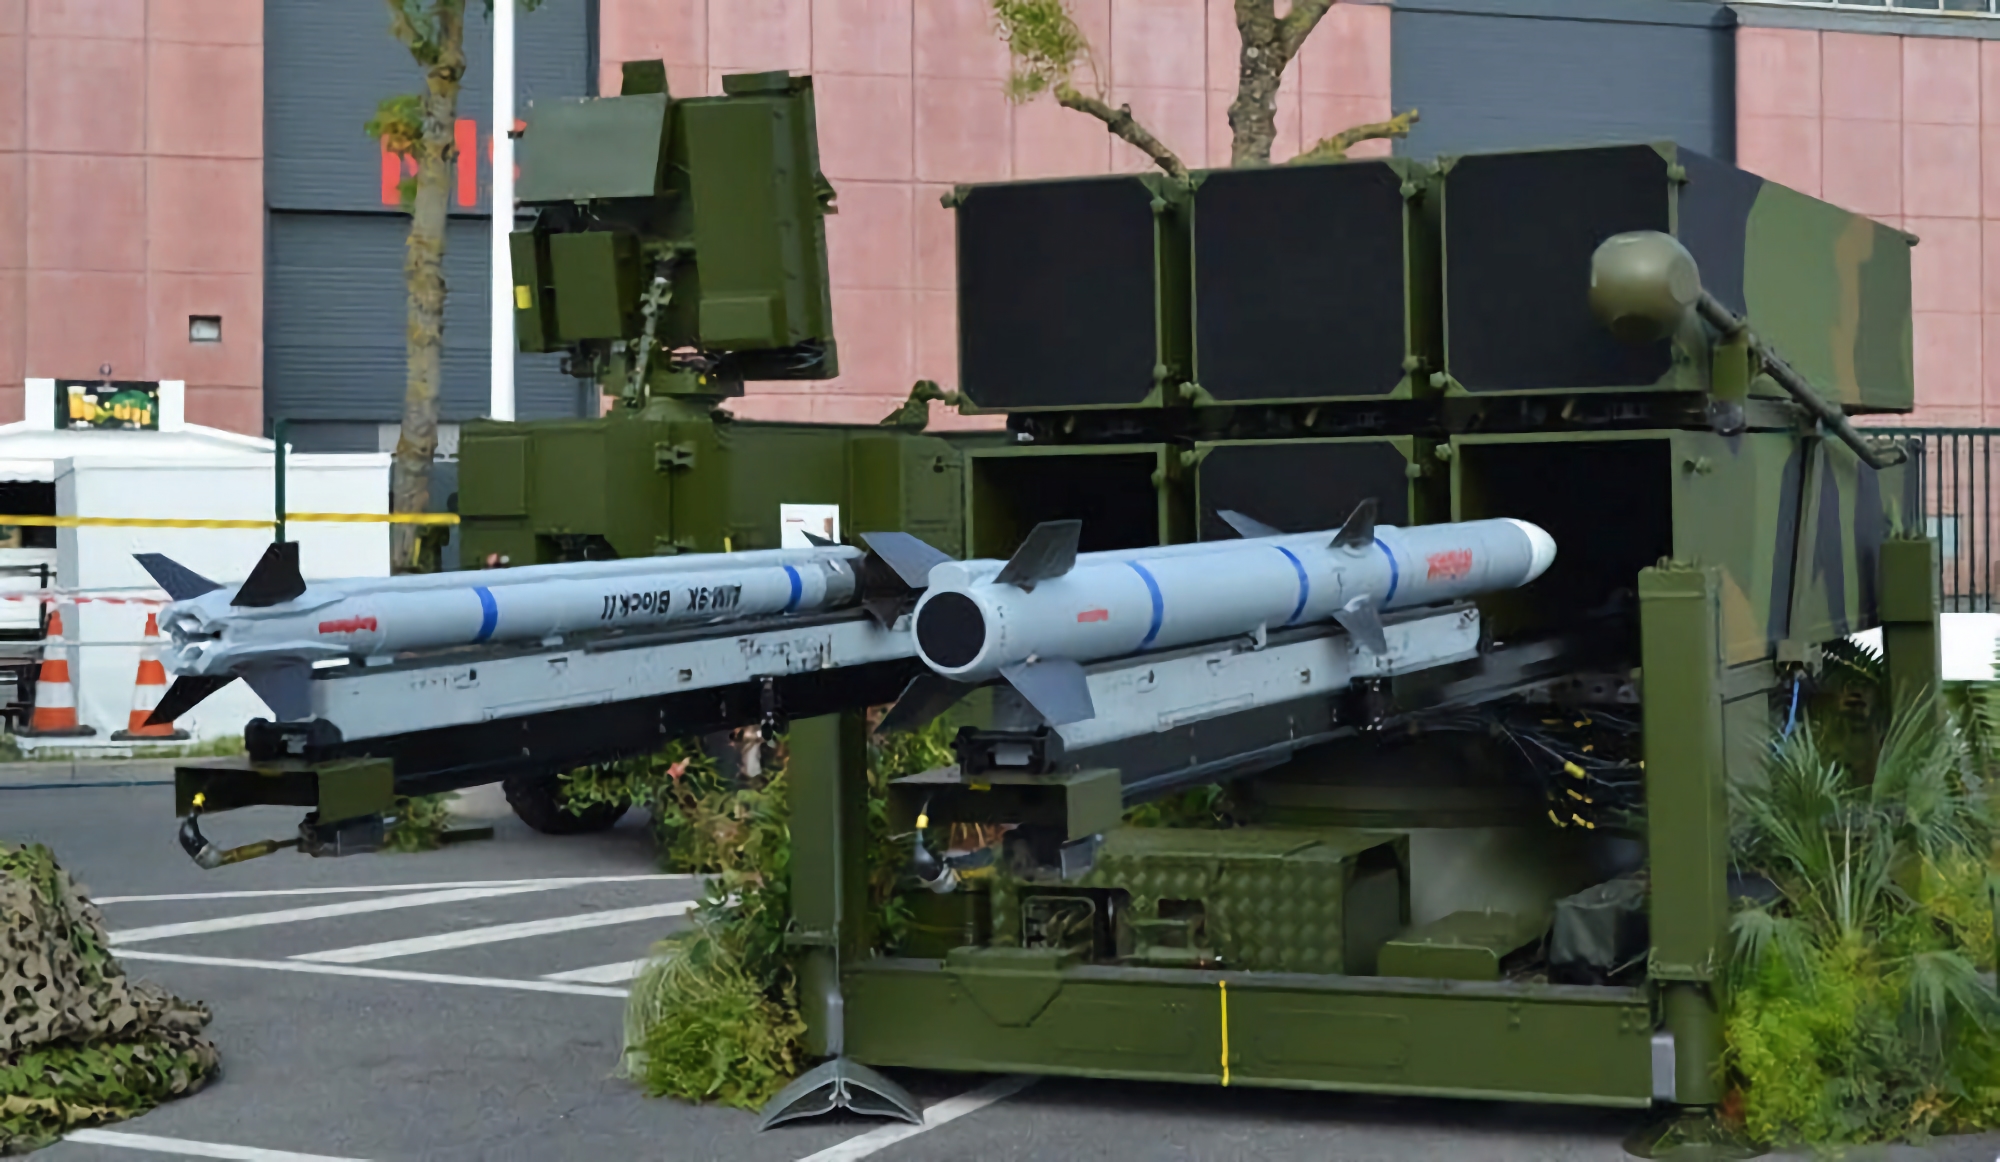 The AFU has in service NASAMS 3rd generation with AIM-9X Sidewinder missiles, this is the newest version of the surface-to-air missile system